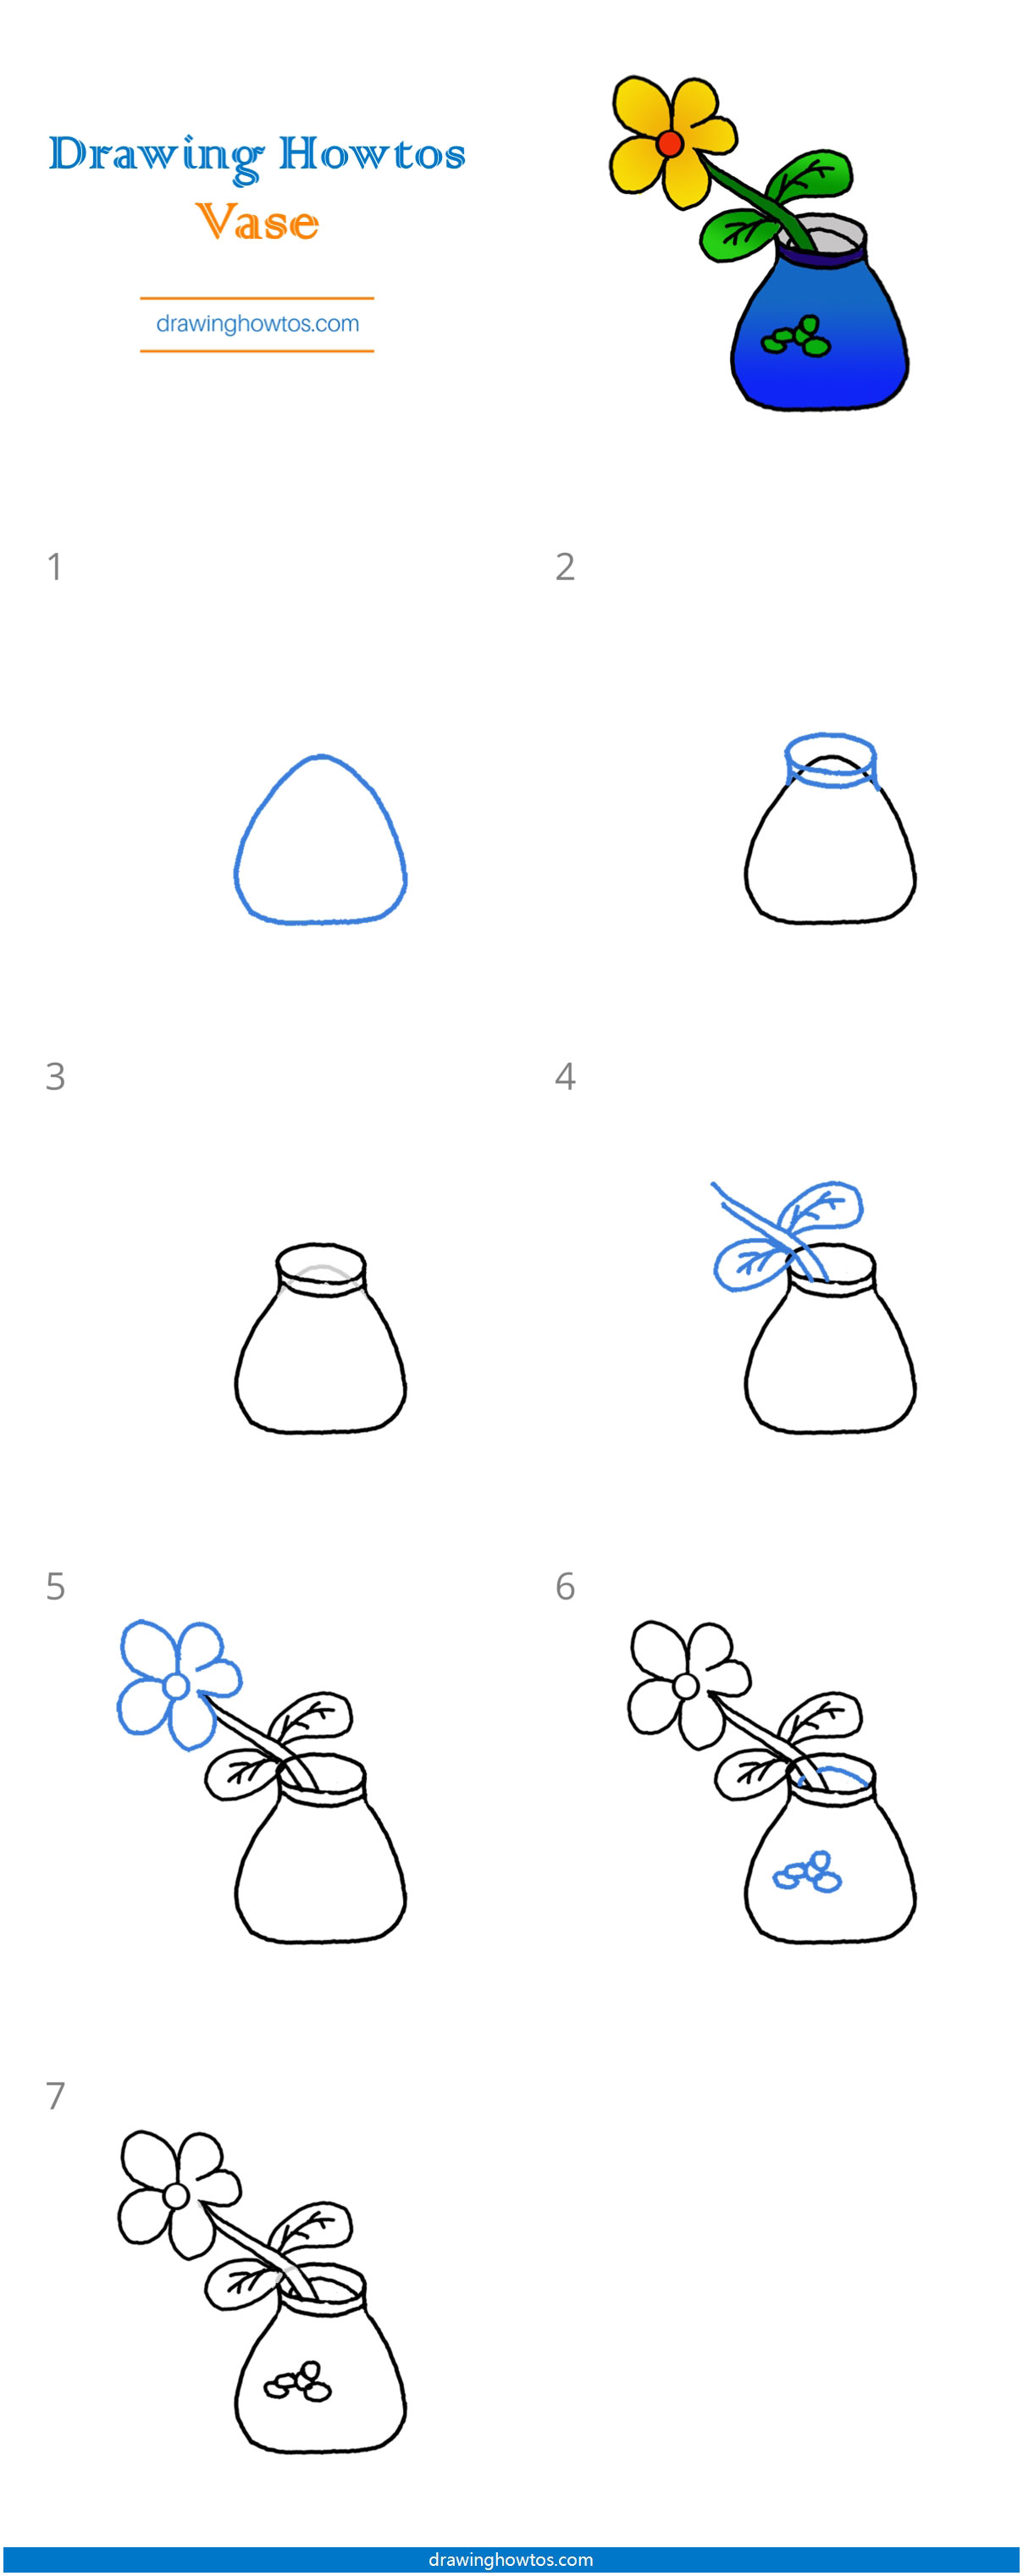 How to Draw a Vase Step by Step